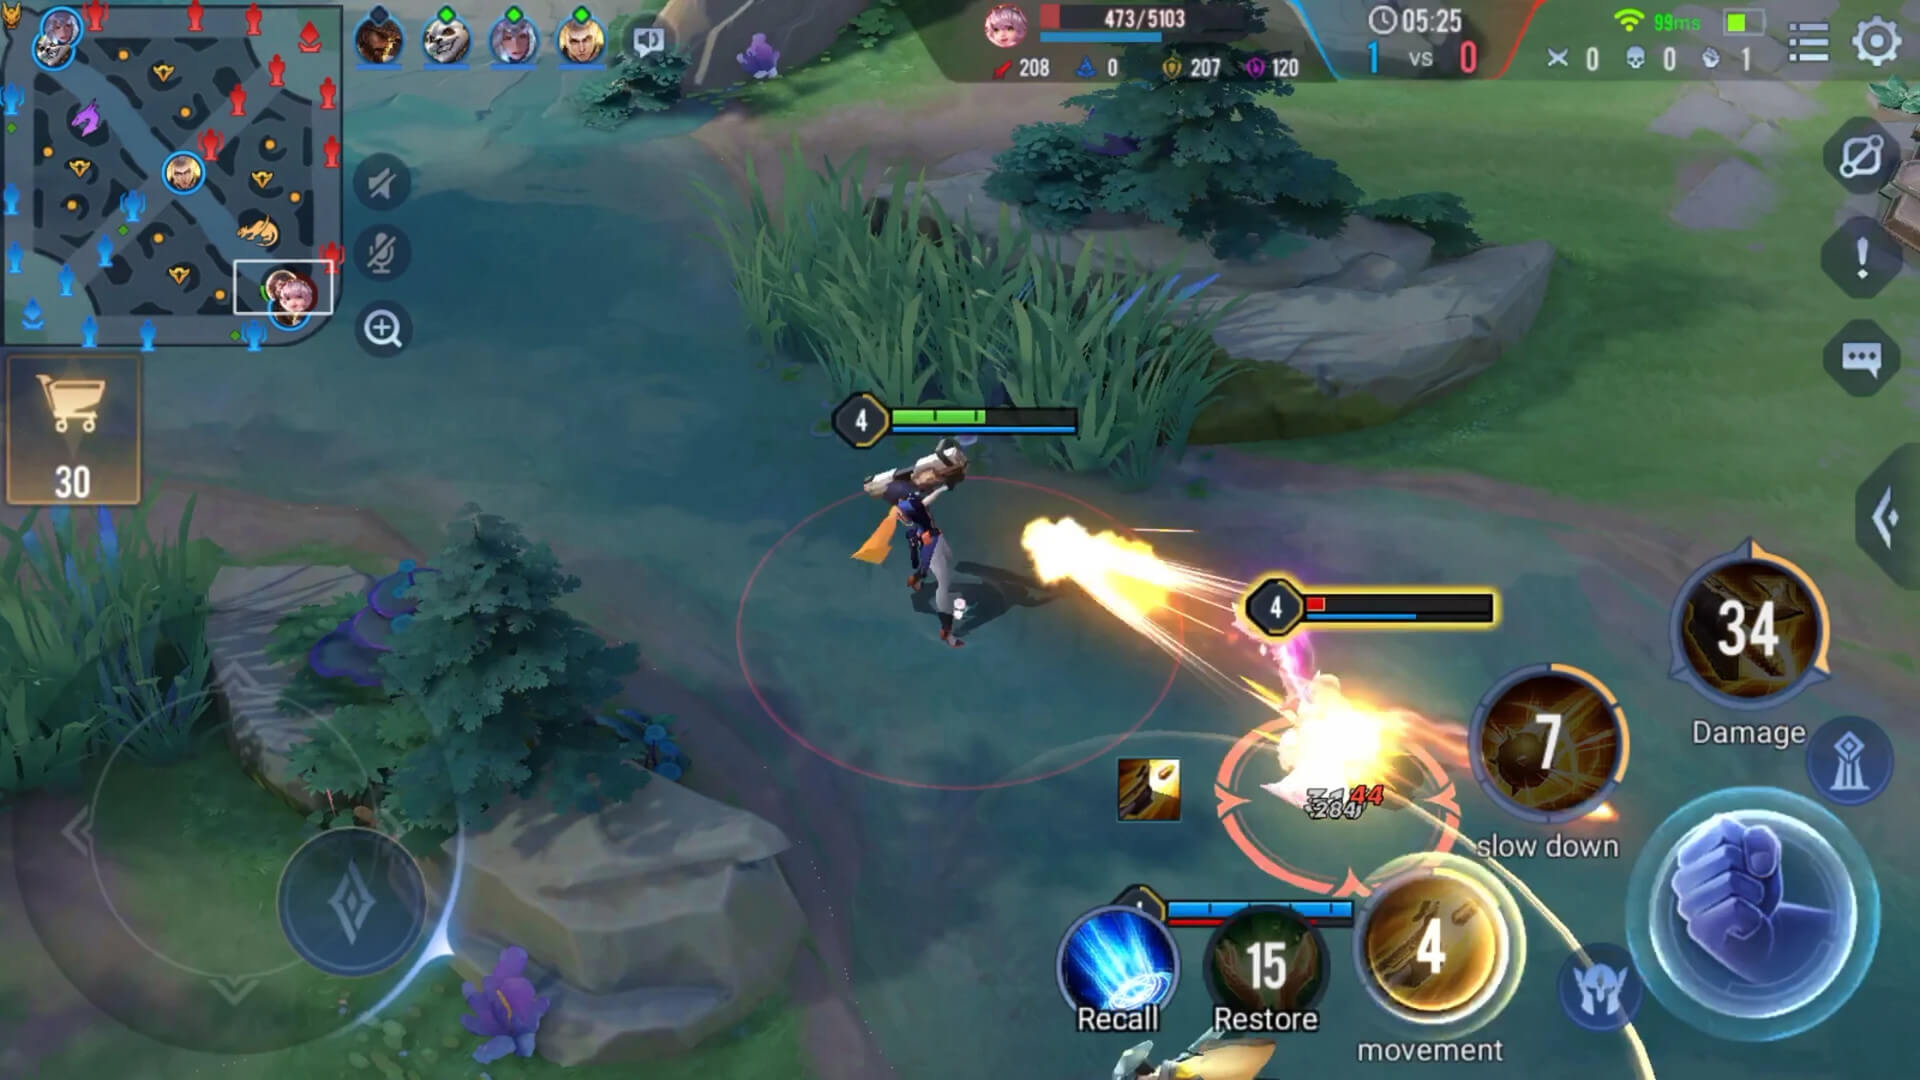 A gameplay screenshot of the mobile MOBA Arena of Valor